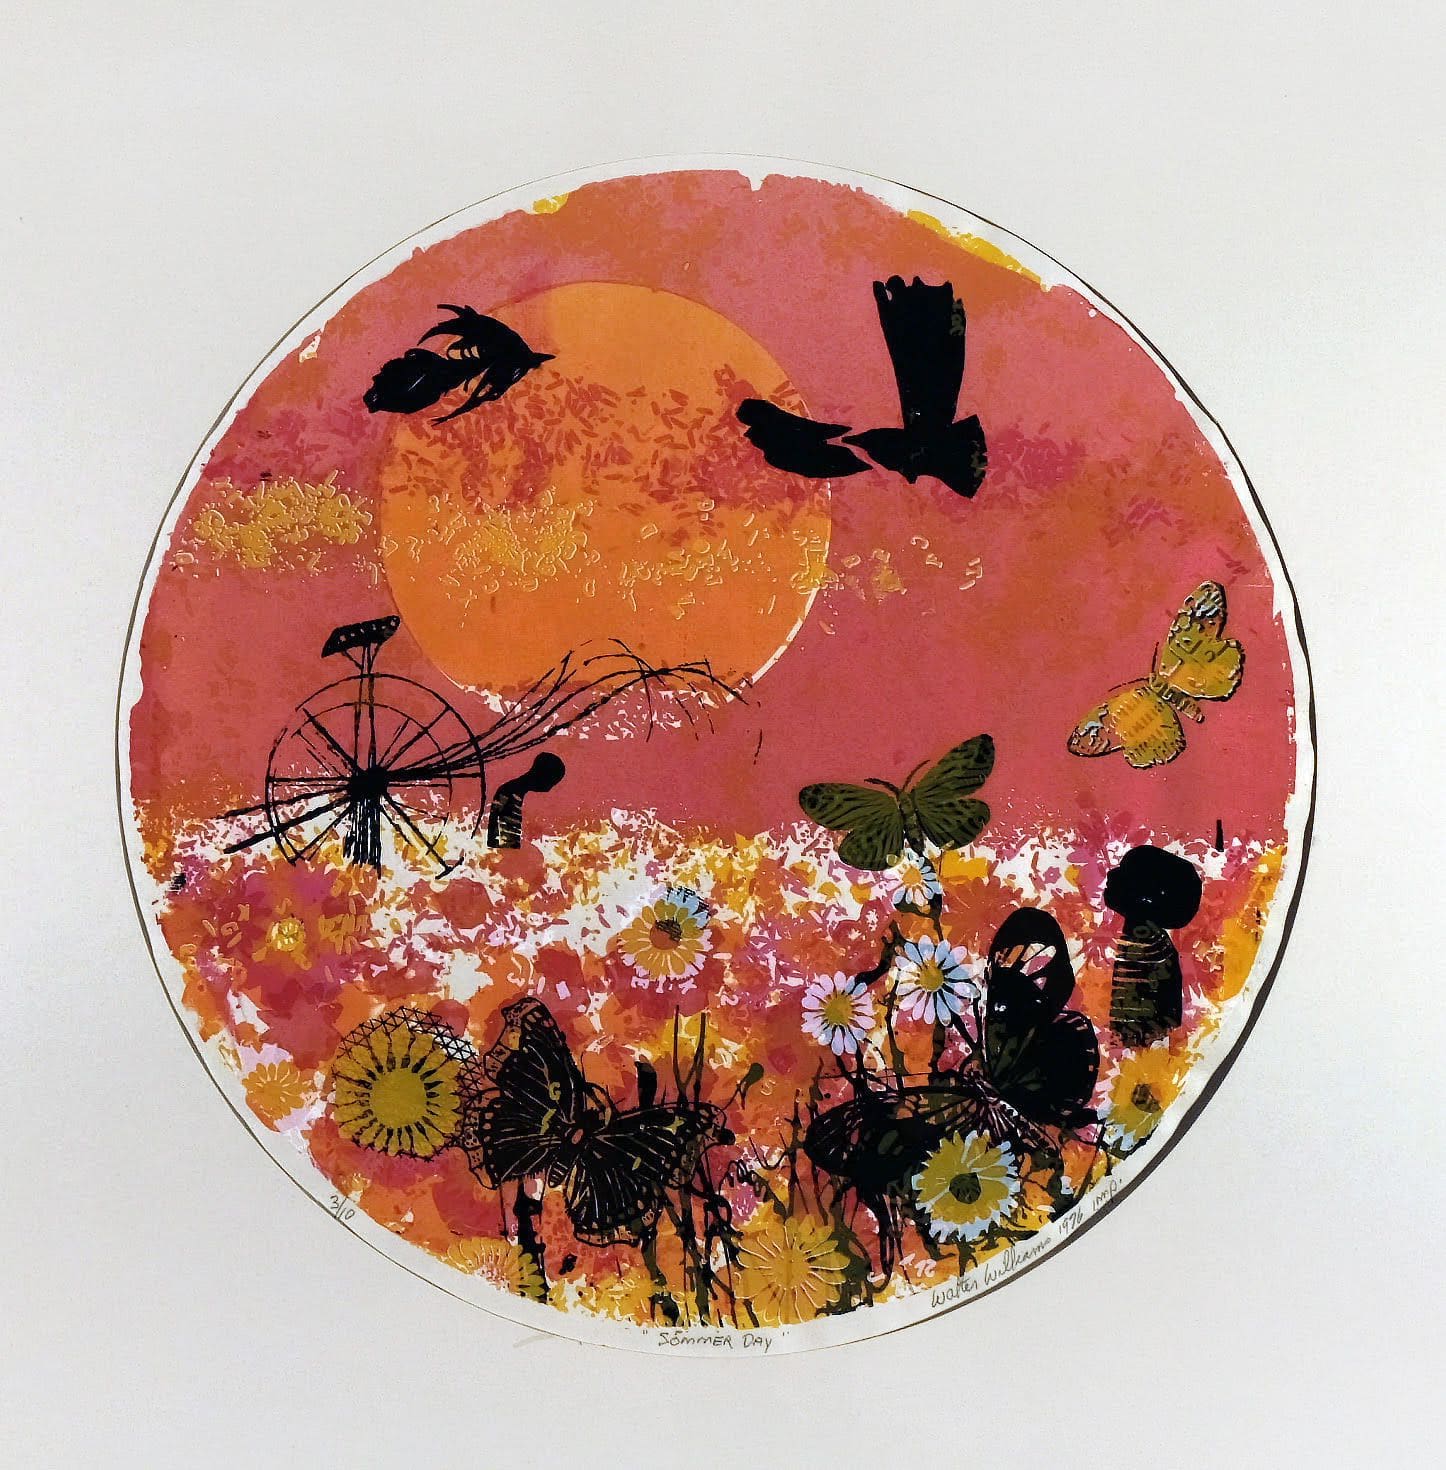 Summer Day, 1976, color woodcut, 14 1/8 inches, diameter, $7,000